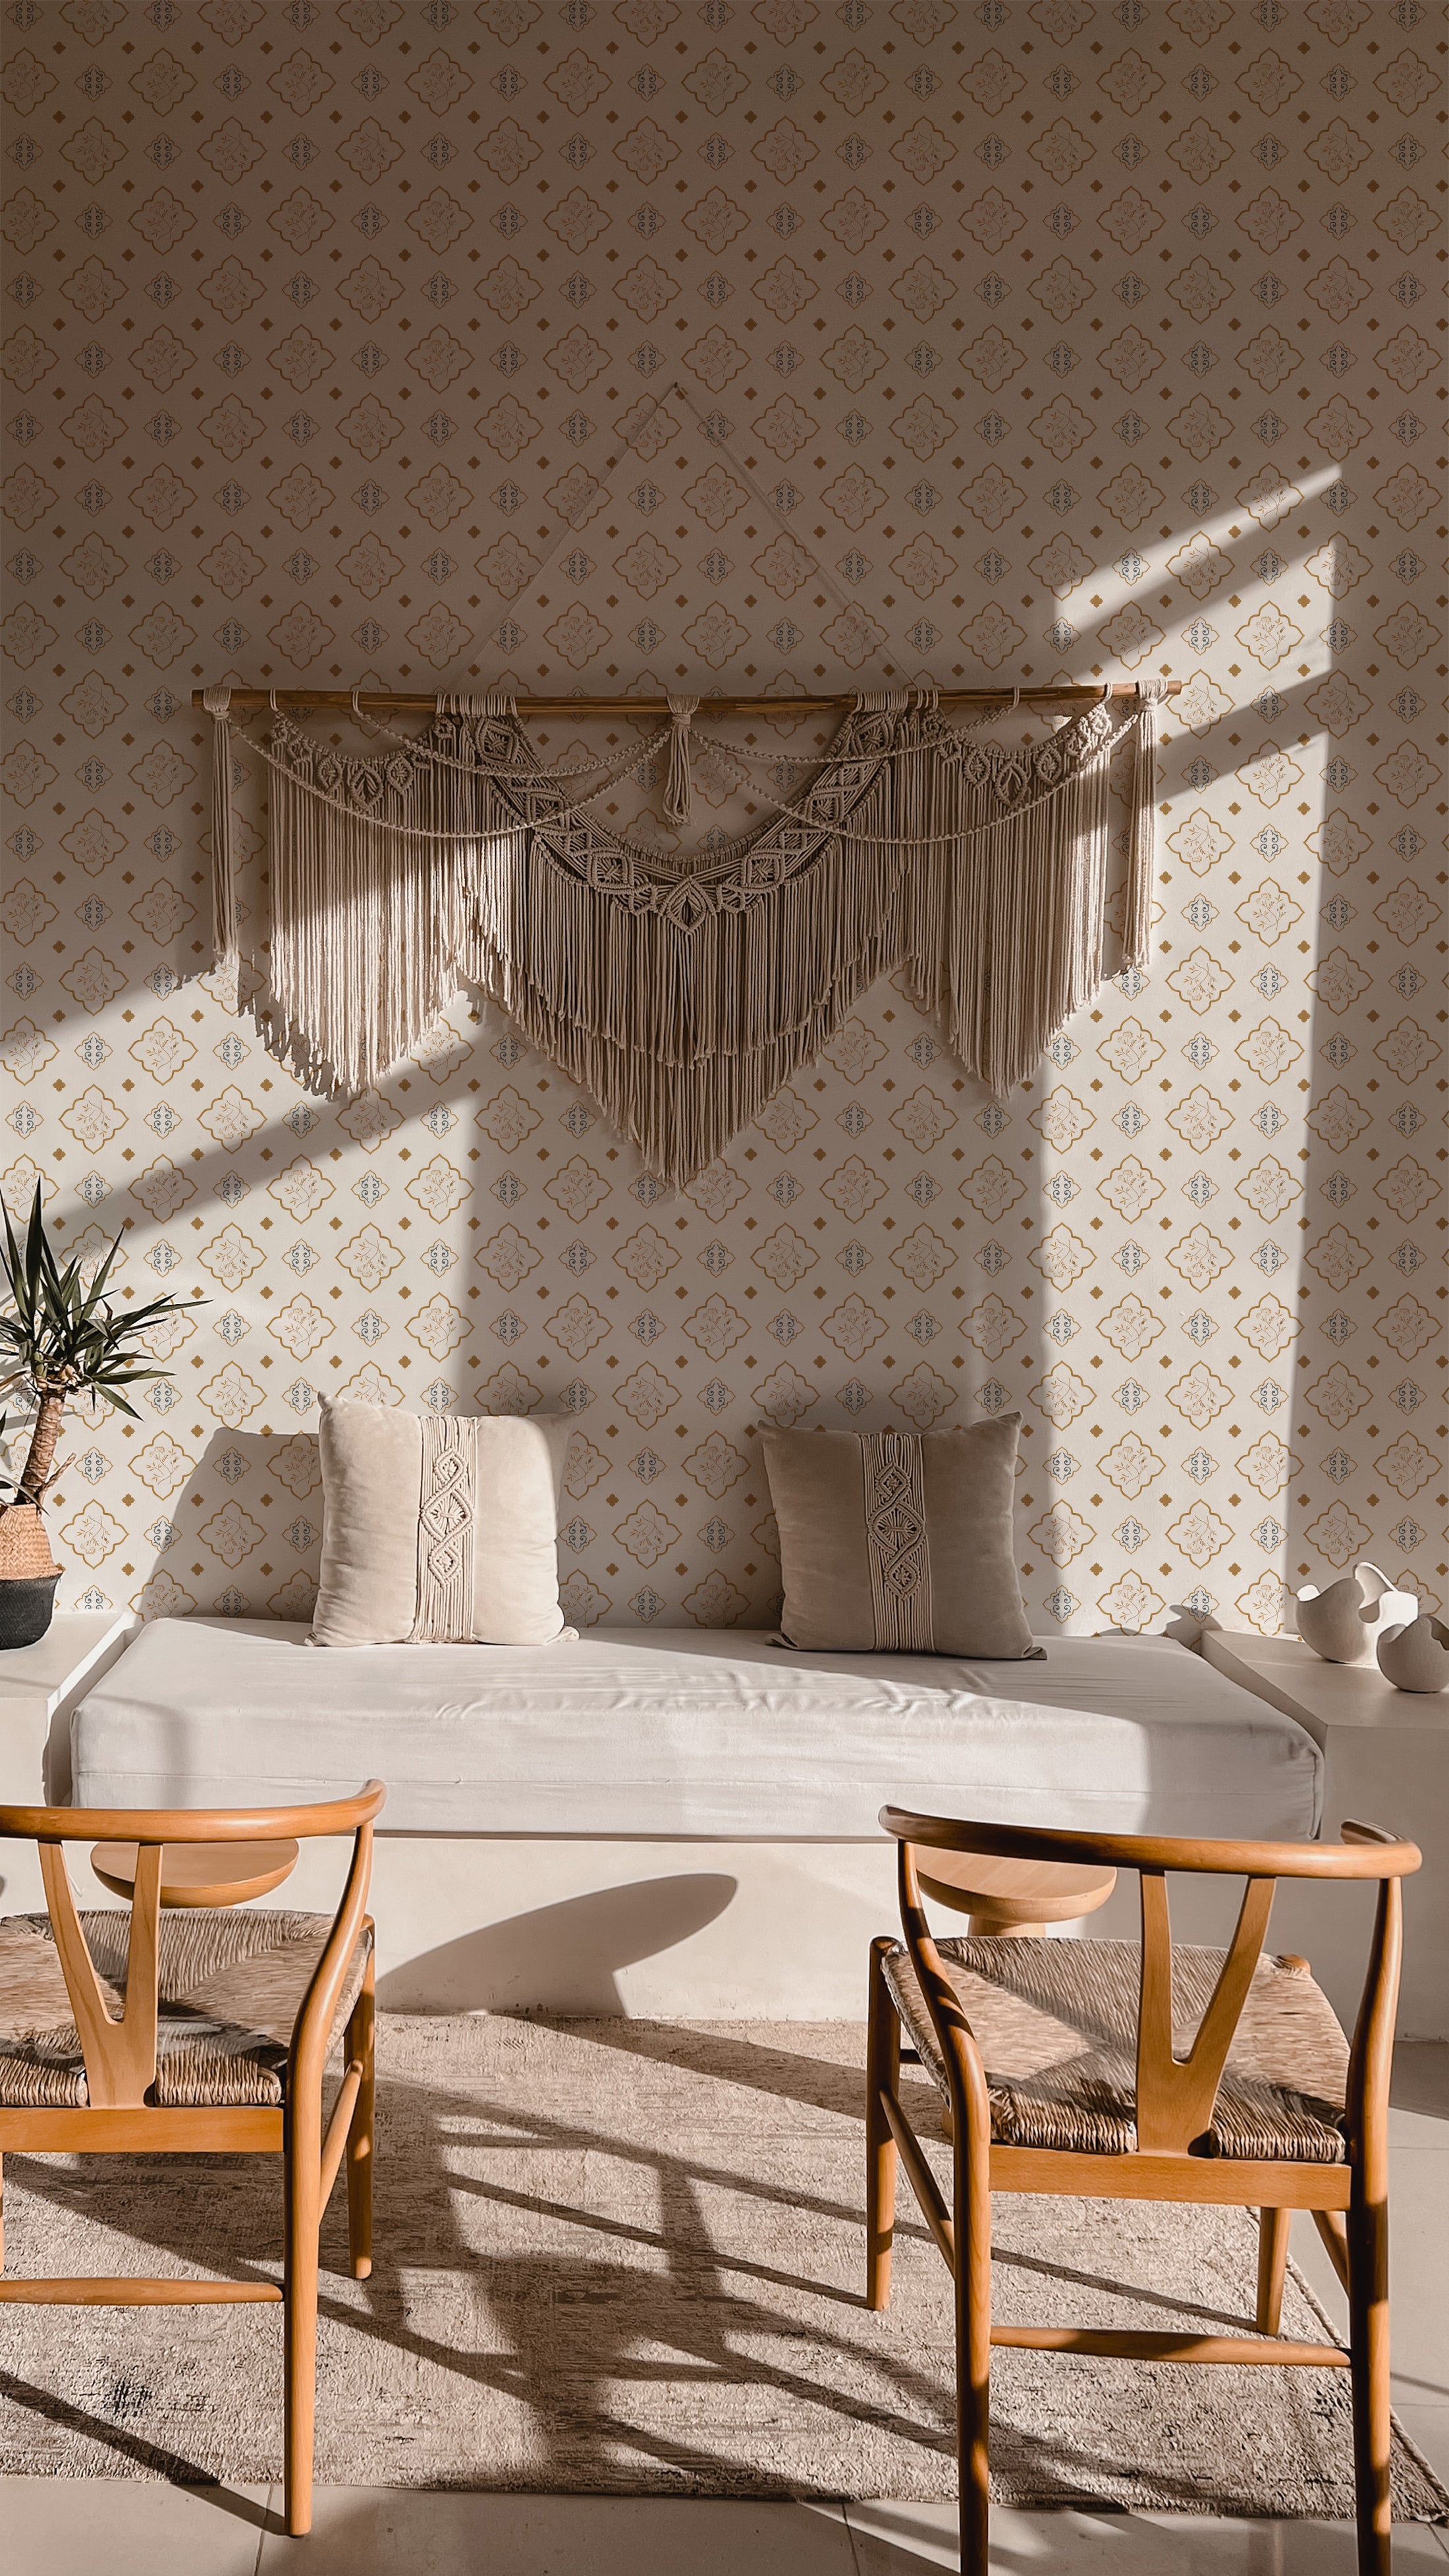 A cozy bedroom scene featuring a daybed with Moroccan Dream Wallpaper as the backdrop, adorned with a beige macrame wall hanging, set in a warmly lit room with wooden chairs and a plush rug